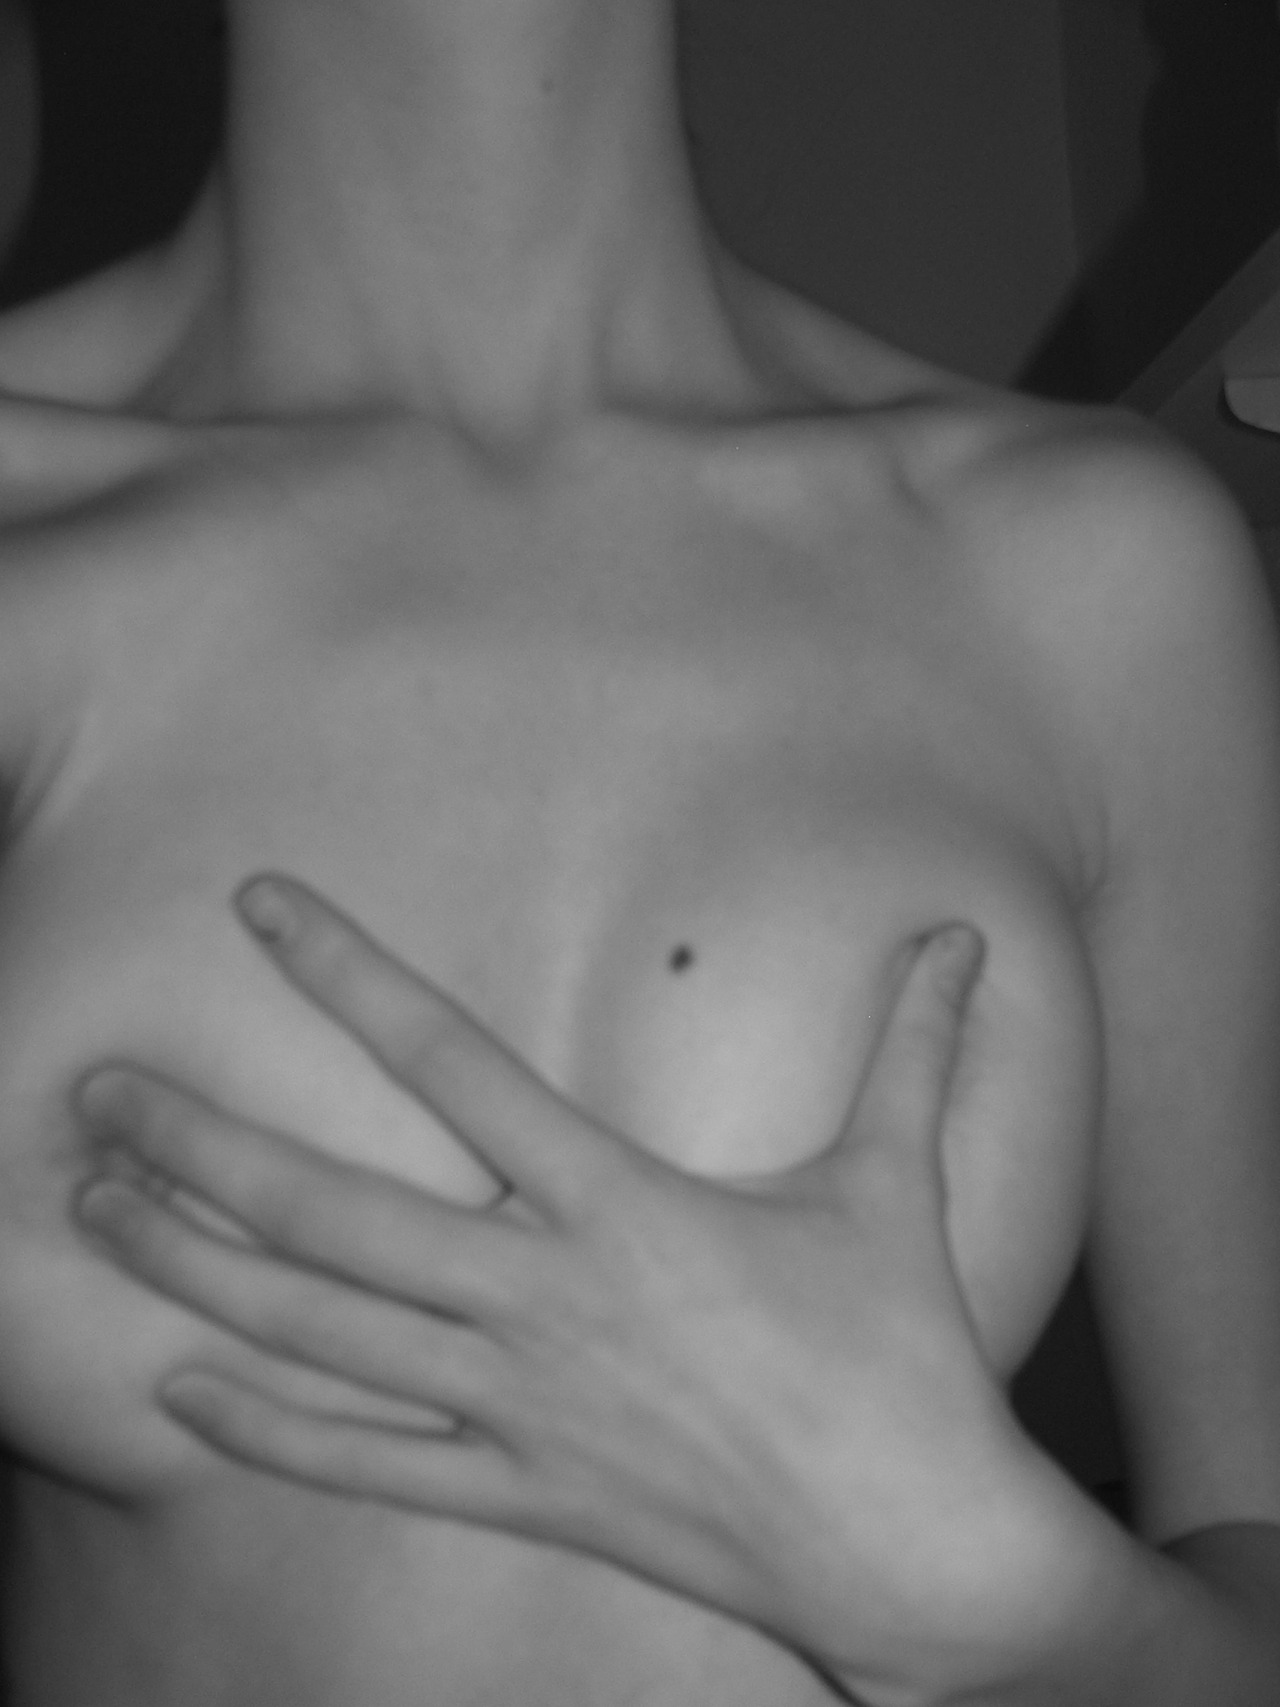 je&ndash;suis&ndash;nue:  A study in black and white (8/11)